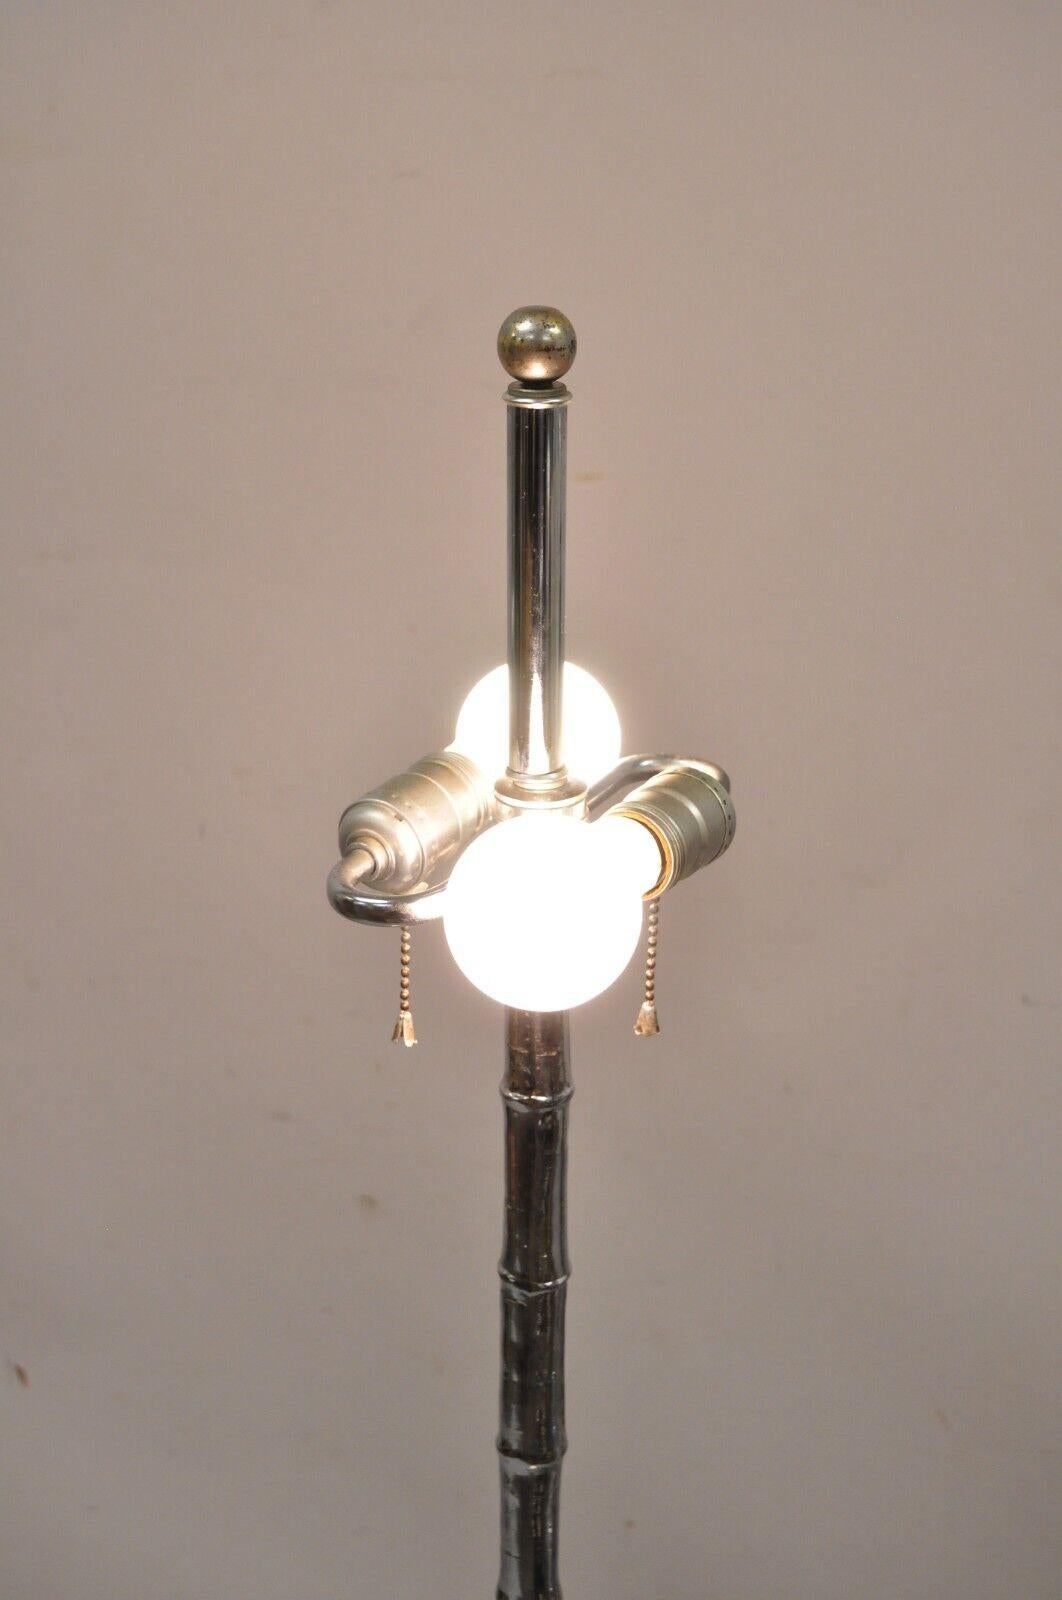 Vintage Hollywood Regency Faux Bois Faux Bamboo Chrome Lotus Floor Lamp In Good Condition For Sale In Philadelphia, PA